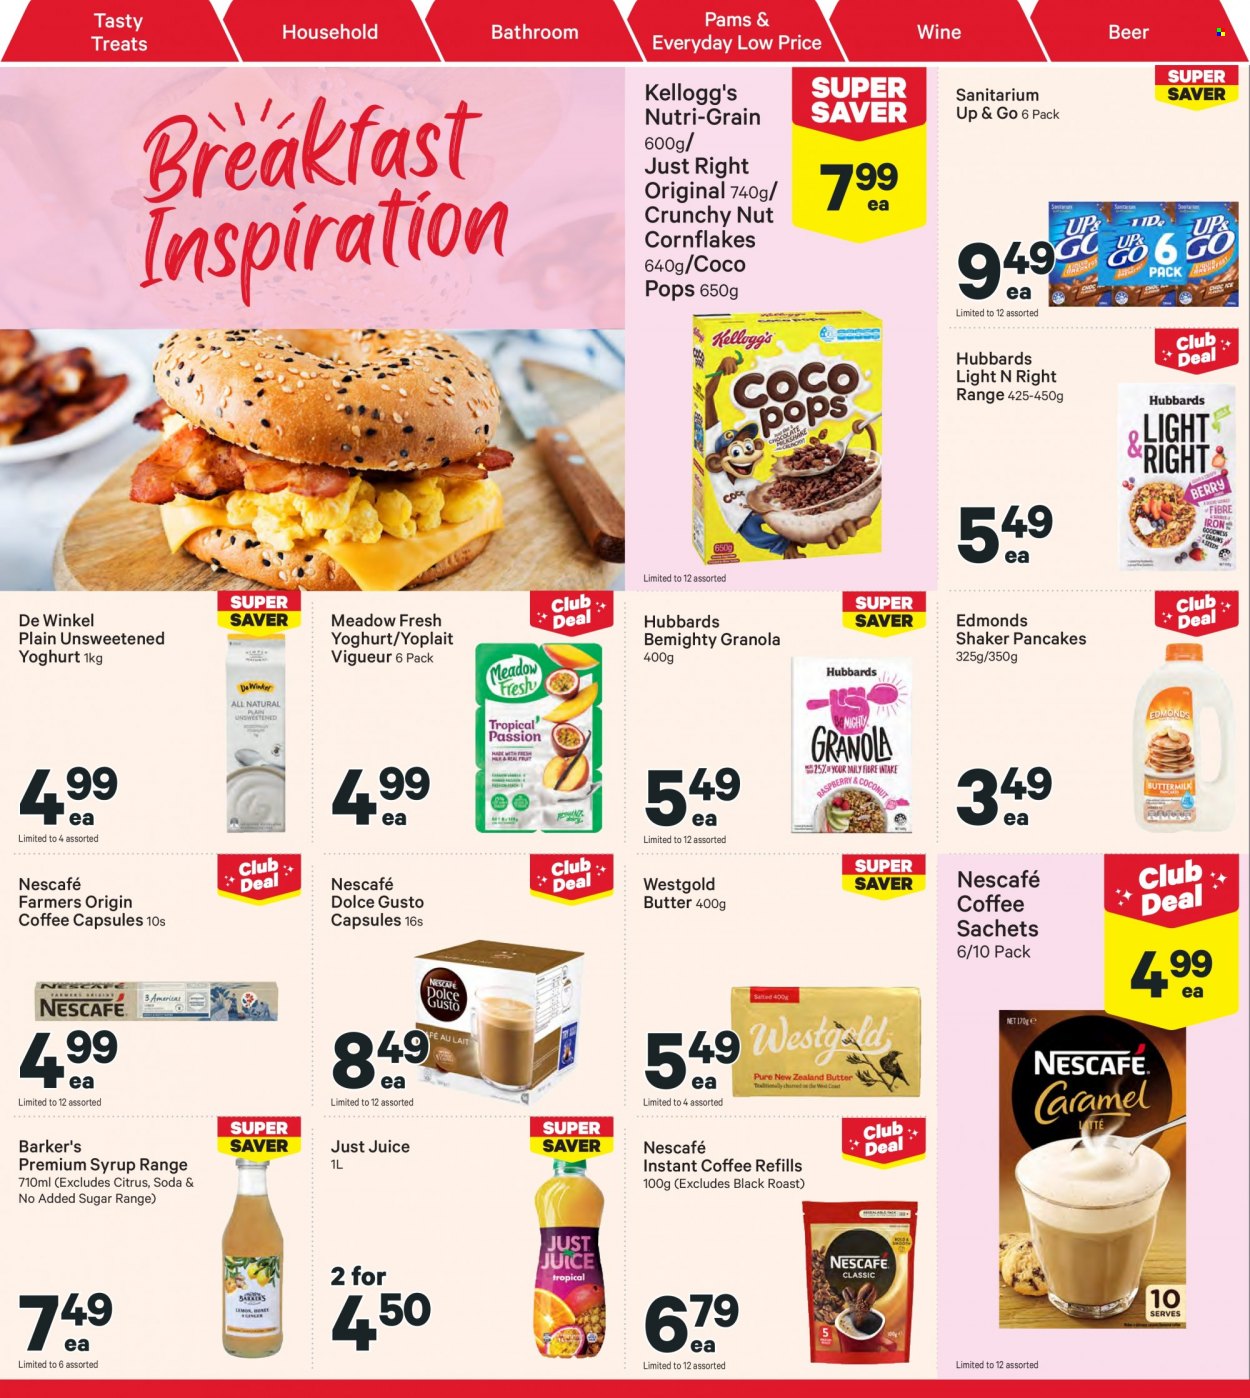 thumbnail - New World mailer - 20.03.2023 - 26.03.2023 - Sales products - pancakes, roast, yoghurt, Yoplait, butter, Kellogg's, granola, corn flakes, coco pops, Nutri-Grain, syrup, juice, soda, coffee, instant coffee, Nescafé, Dolce Gusto, coffee capsules, wine, beer, shaker. Page 14.